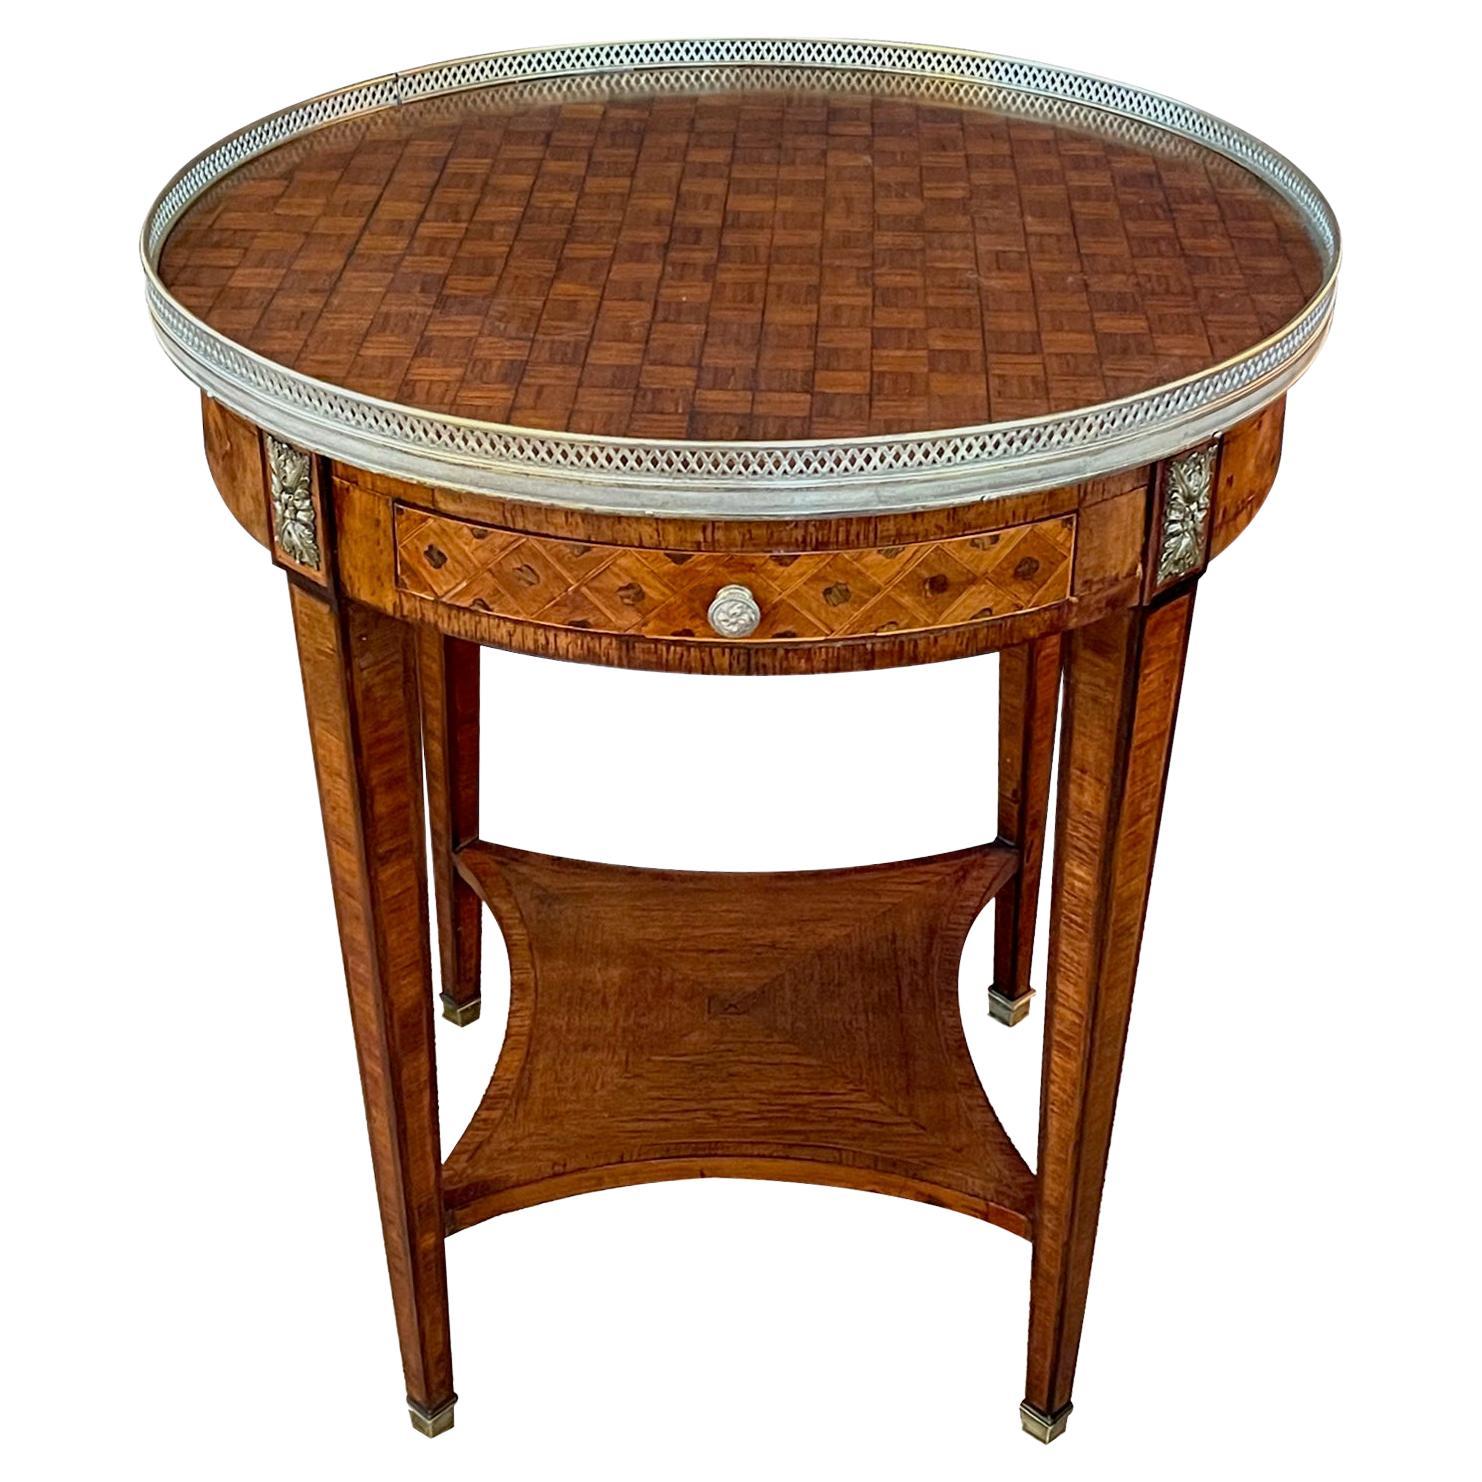 French Louis XVI Style Marquetry Inlaid Circular Side Table/Gueridon